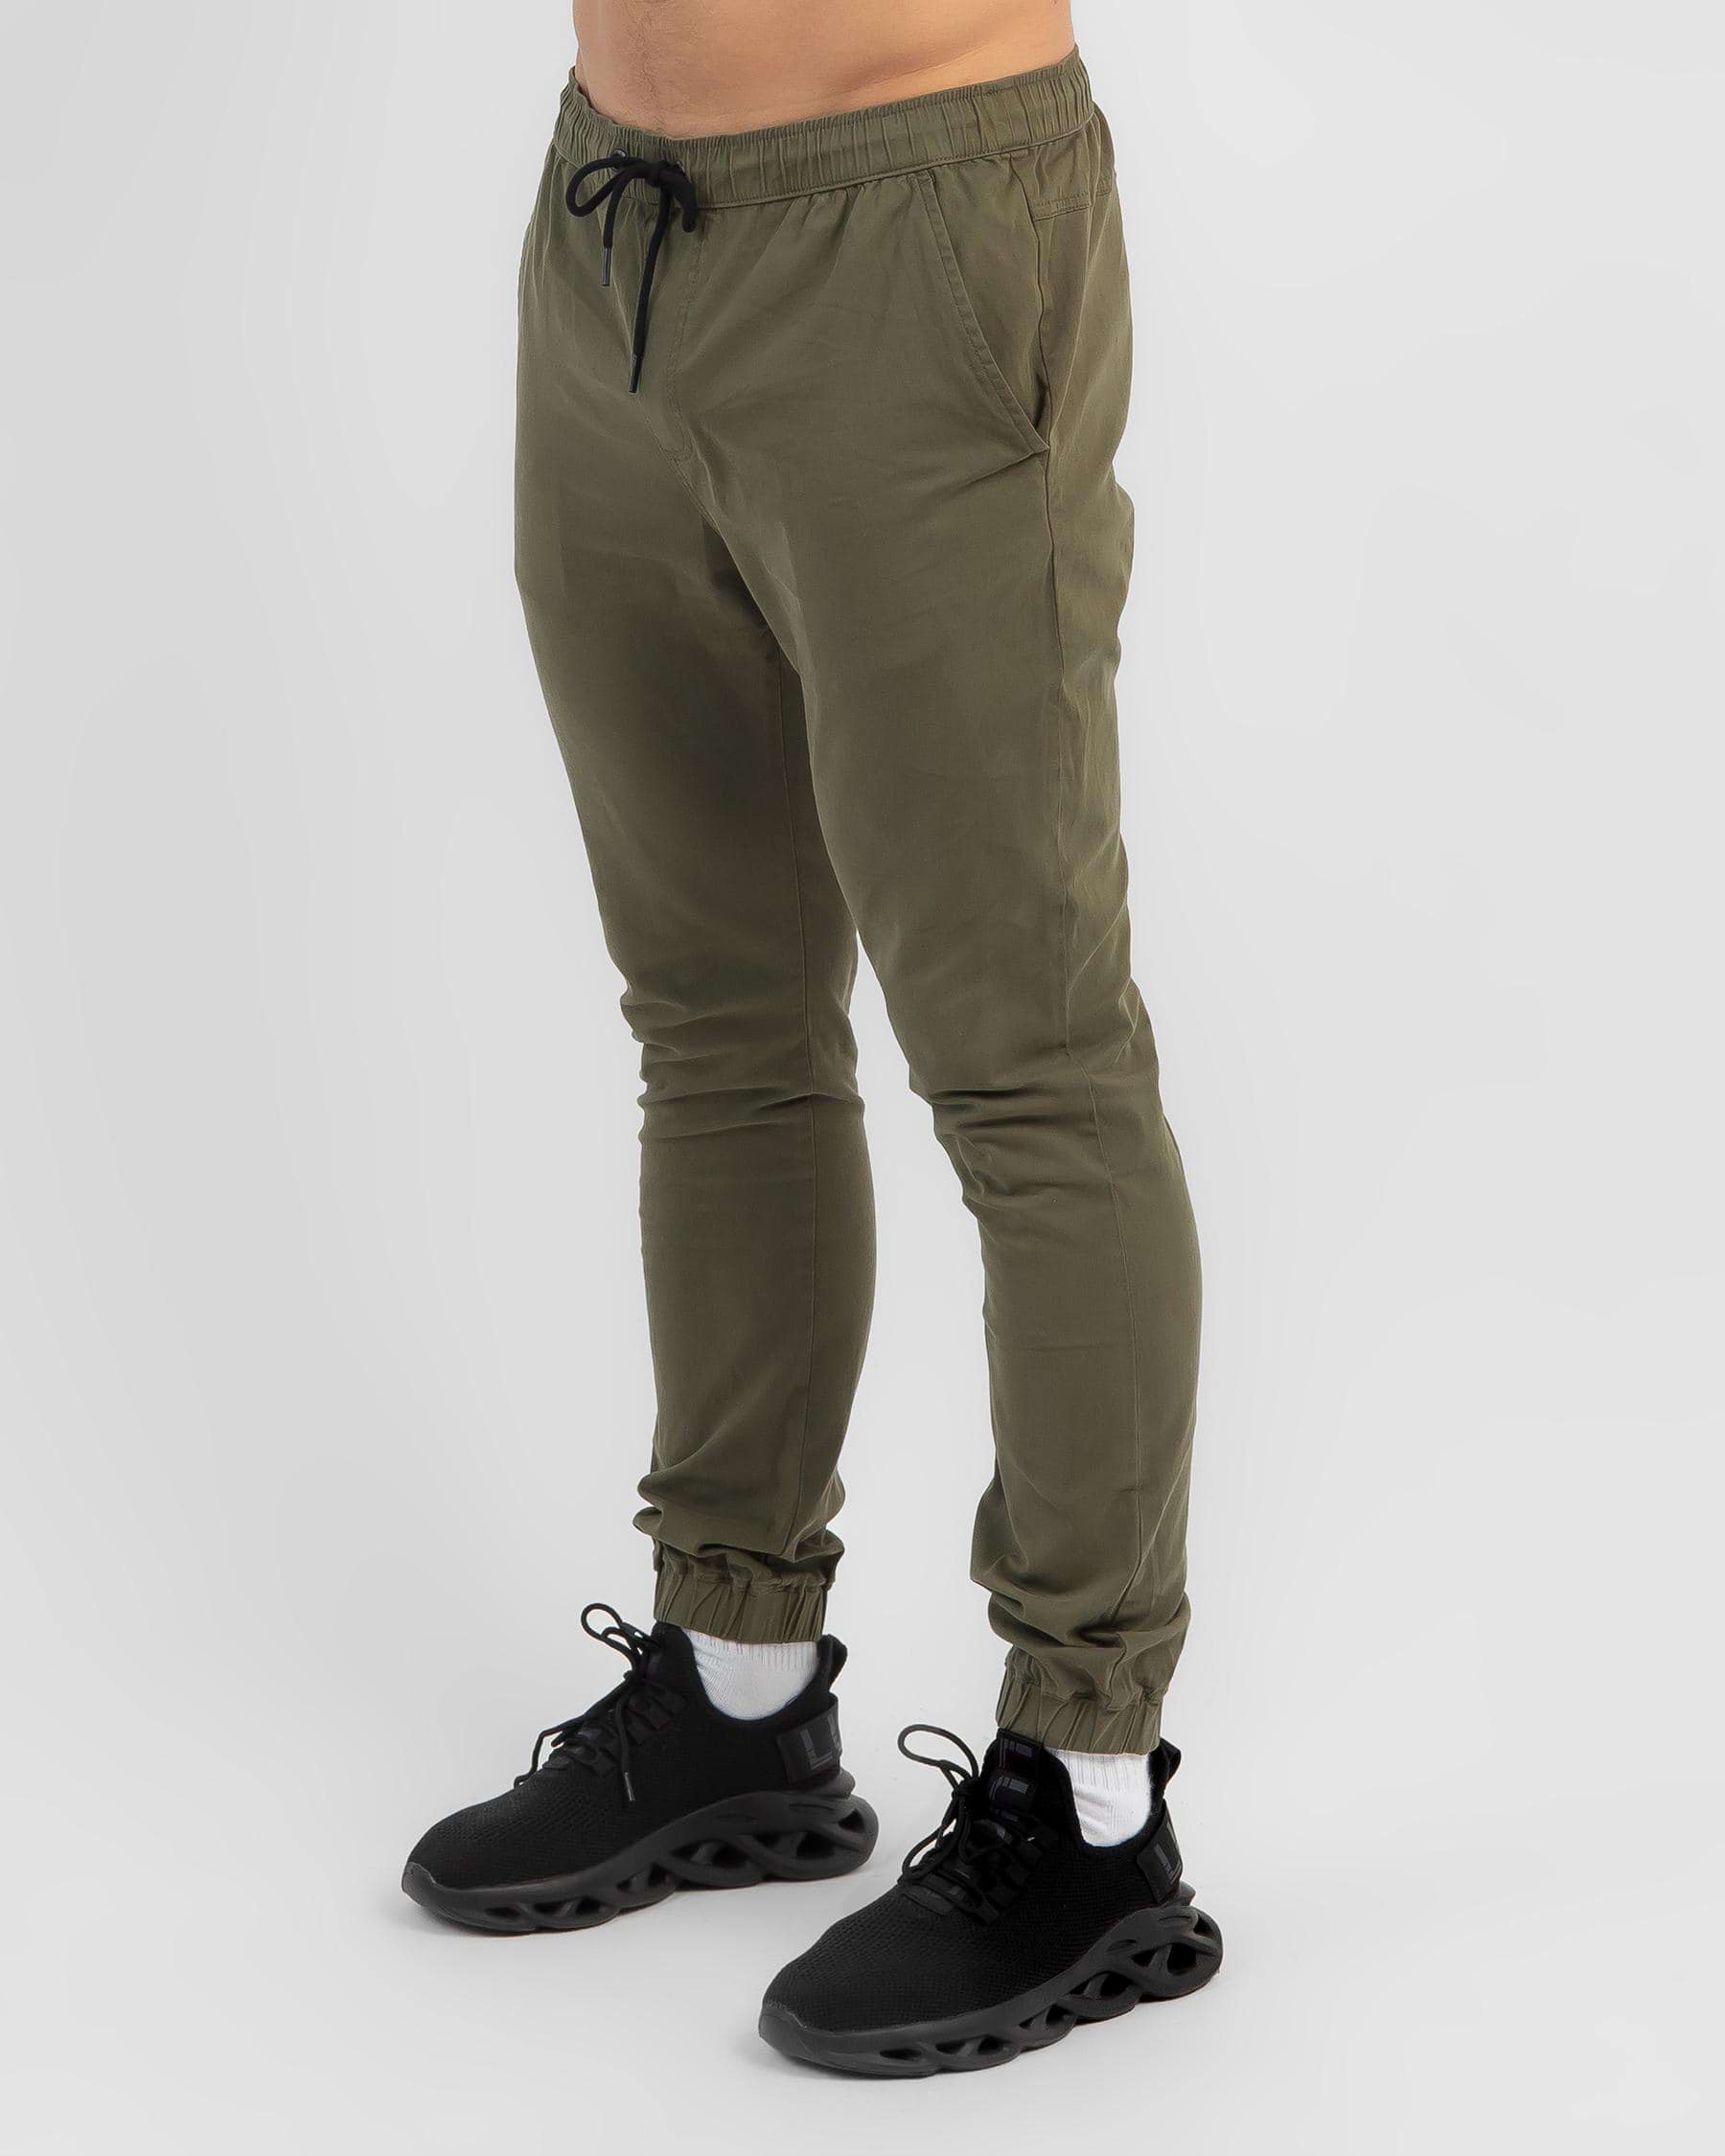 Lucid Cascade Jogger Pants In Dark Olive - Fast Shipping & Easy Returns ...